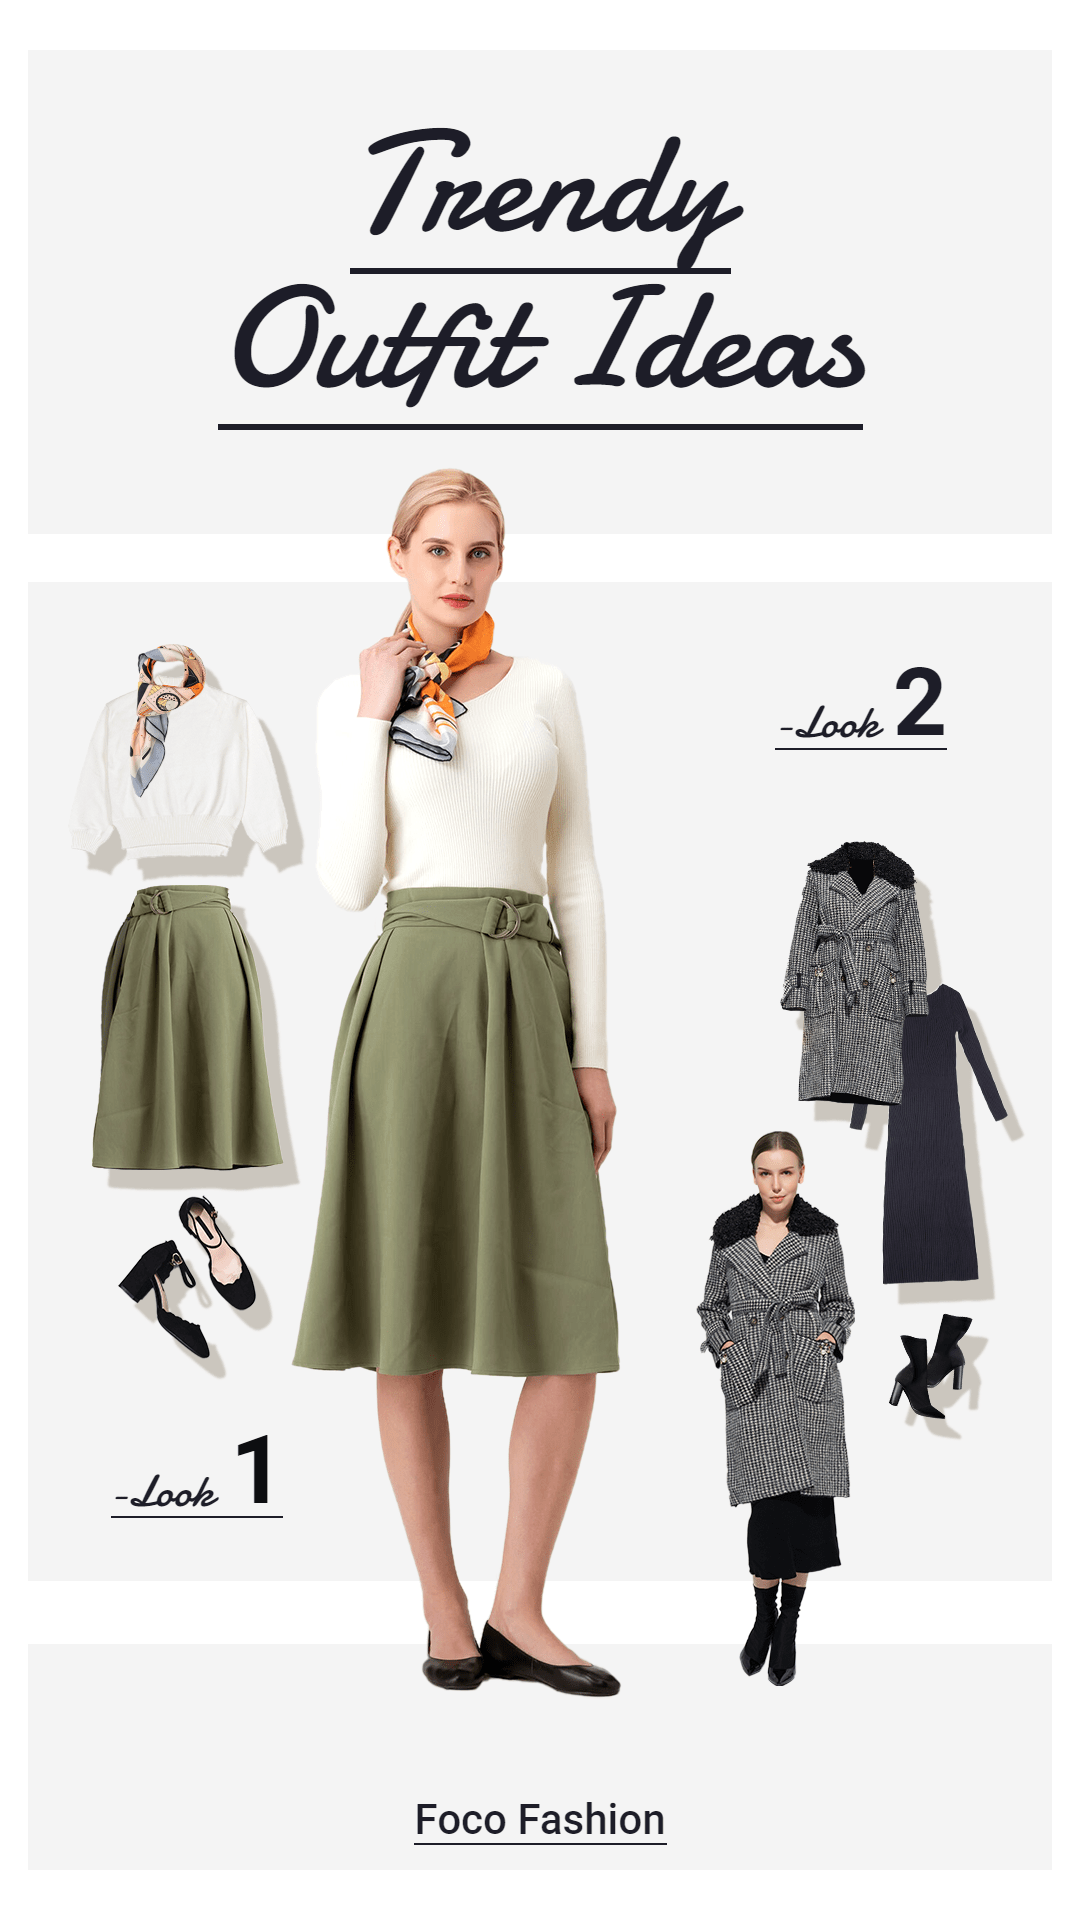 Fashion Women's Outfit Display Ecommerce Story预览效果